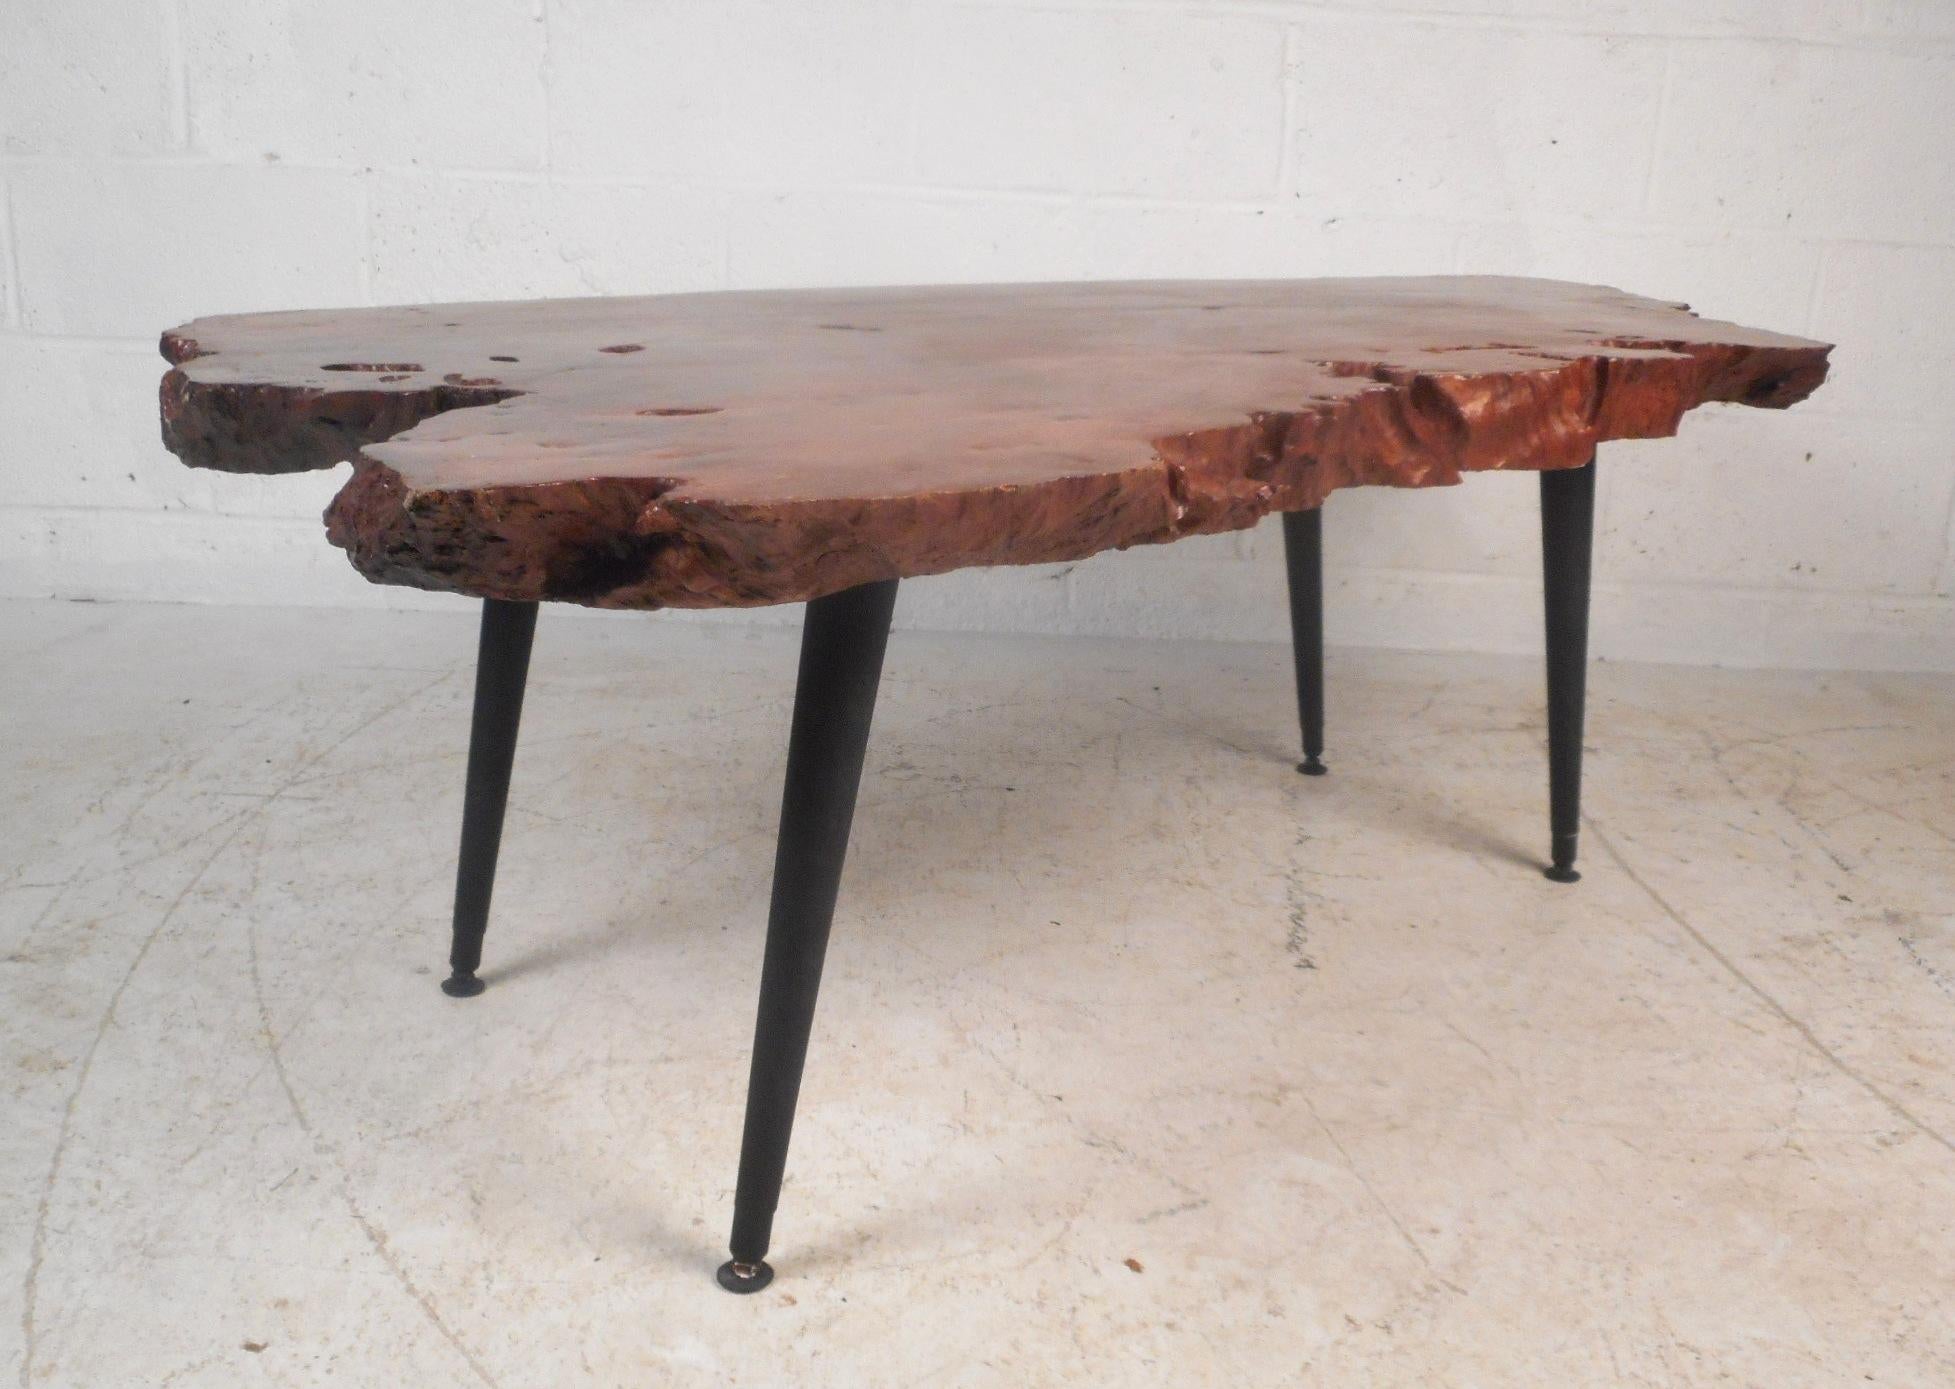 A wonderful vintage modern coffee table with a natural tree slab top and splayed black legs. This unique table features live edges and a sleek lacquered finish on the top. This large rustic style coffee table makes the perfect eye-catching addition